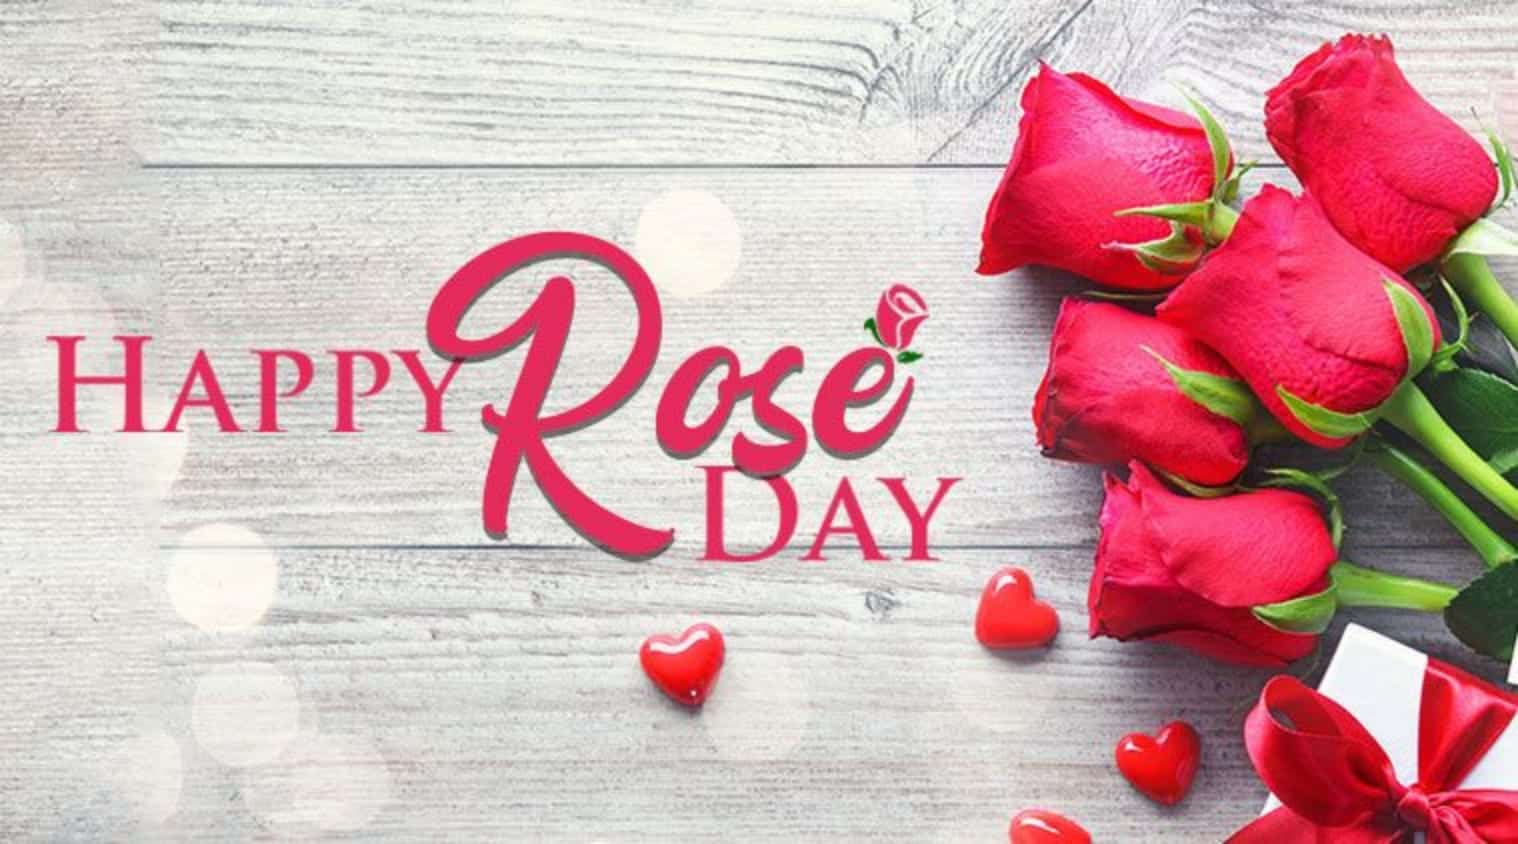 Rose Day Pic